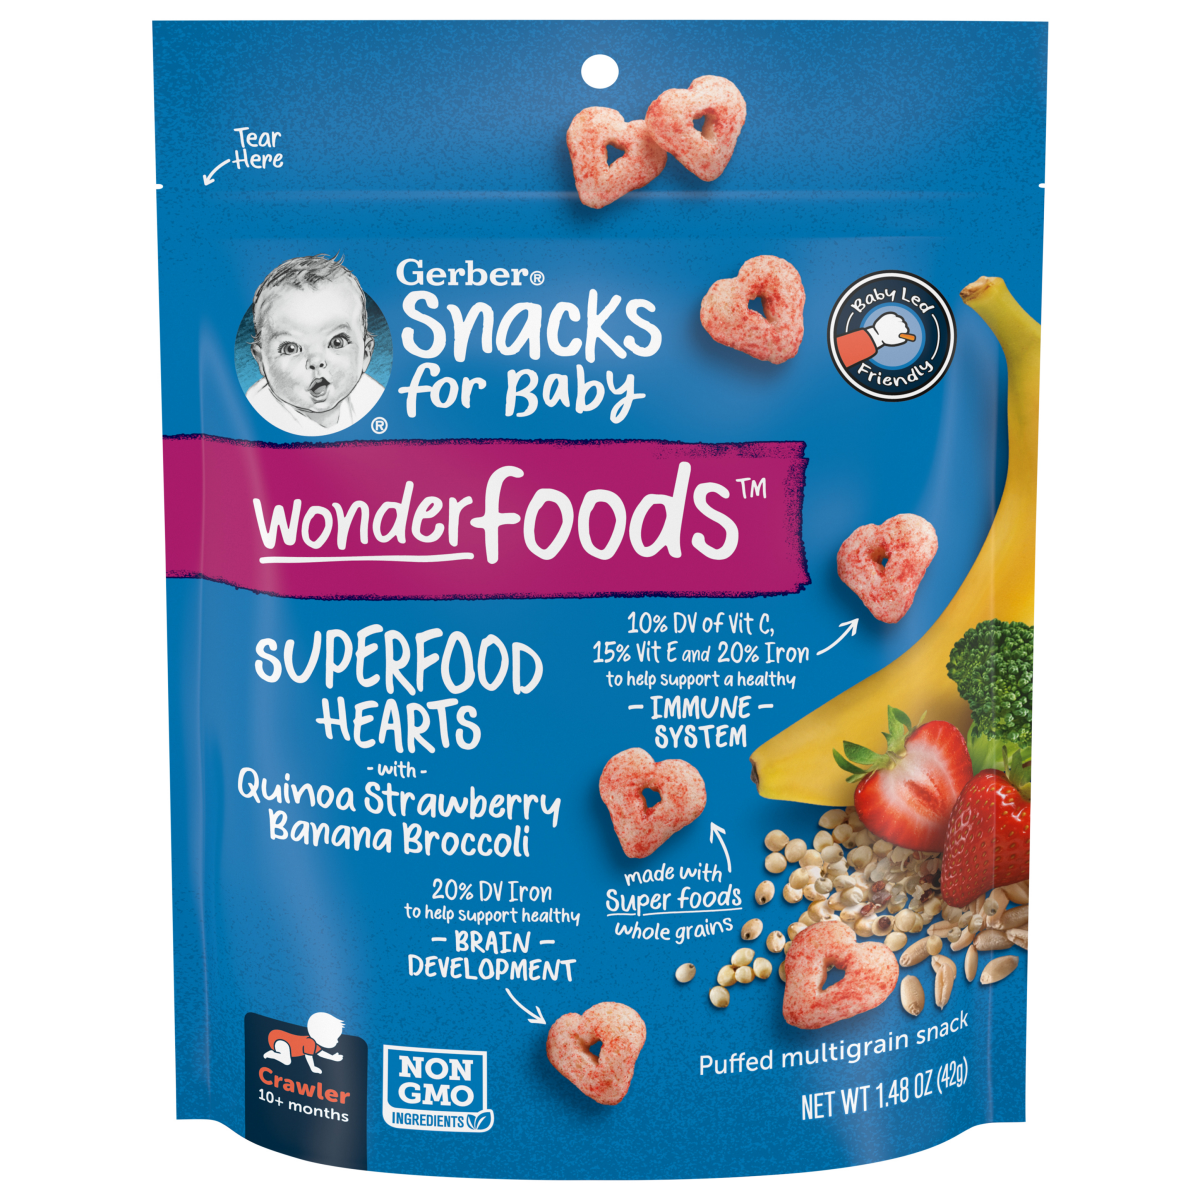 Save $2.69 OFF on ANY TWO (2) Gerber Wonderfoods Snacks